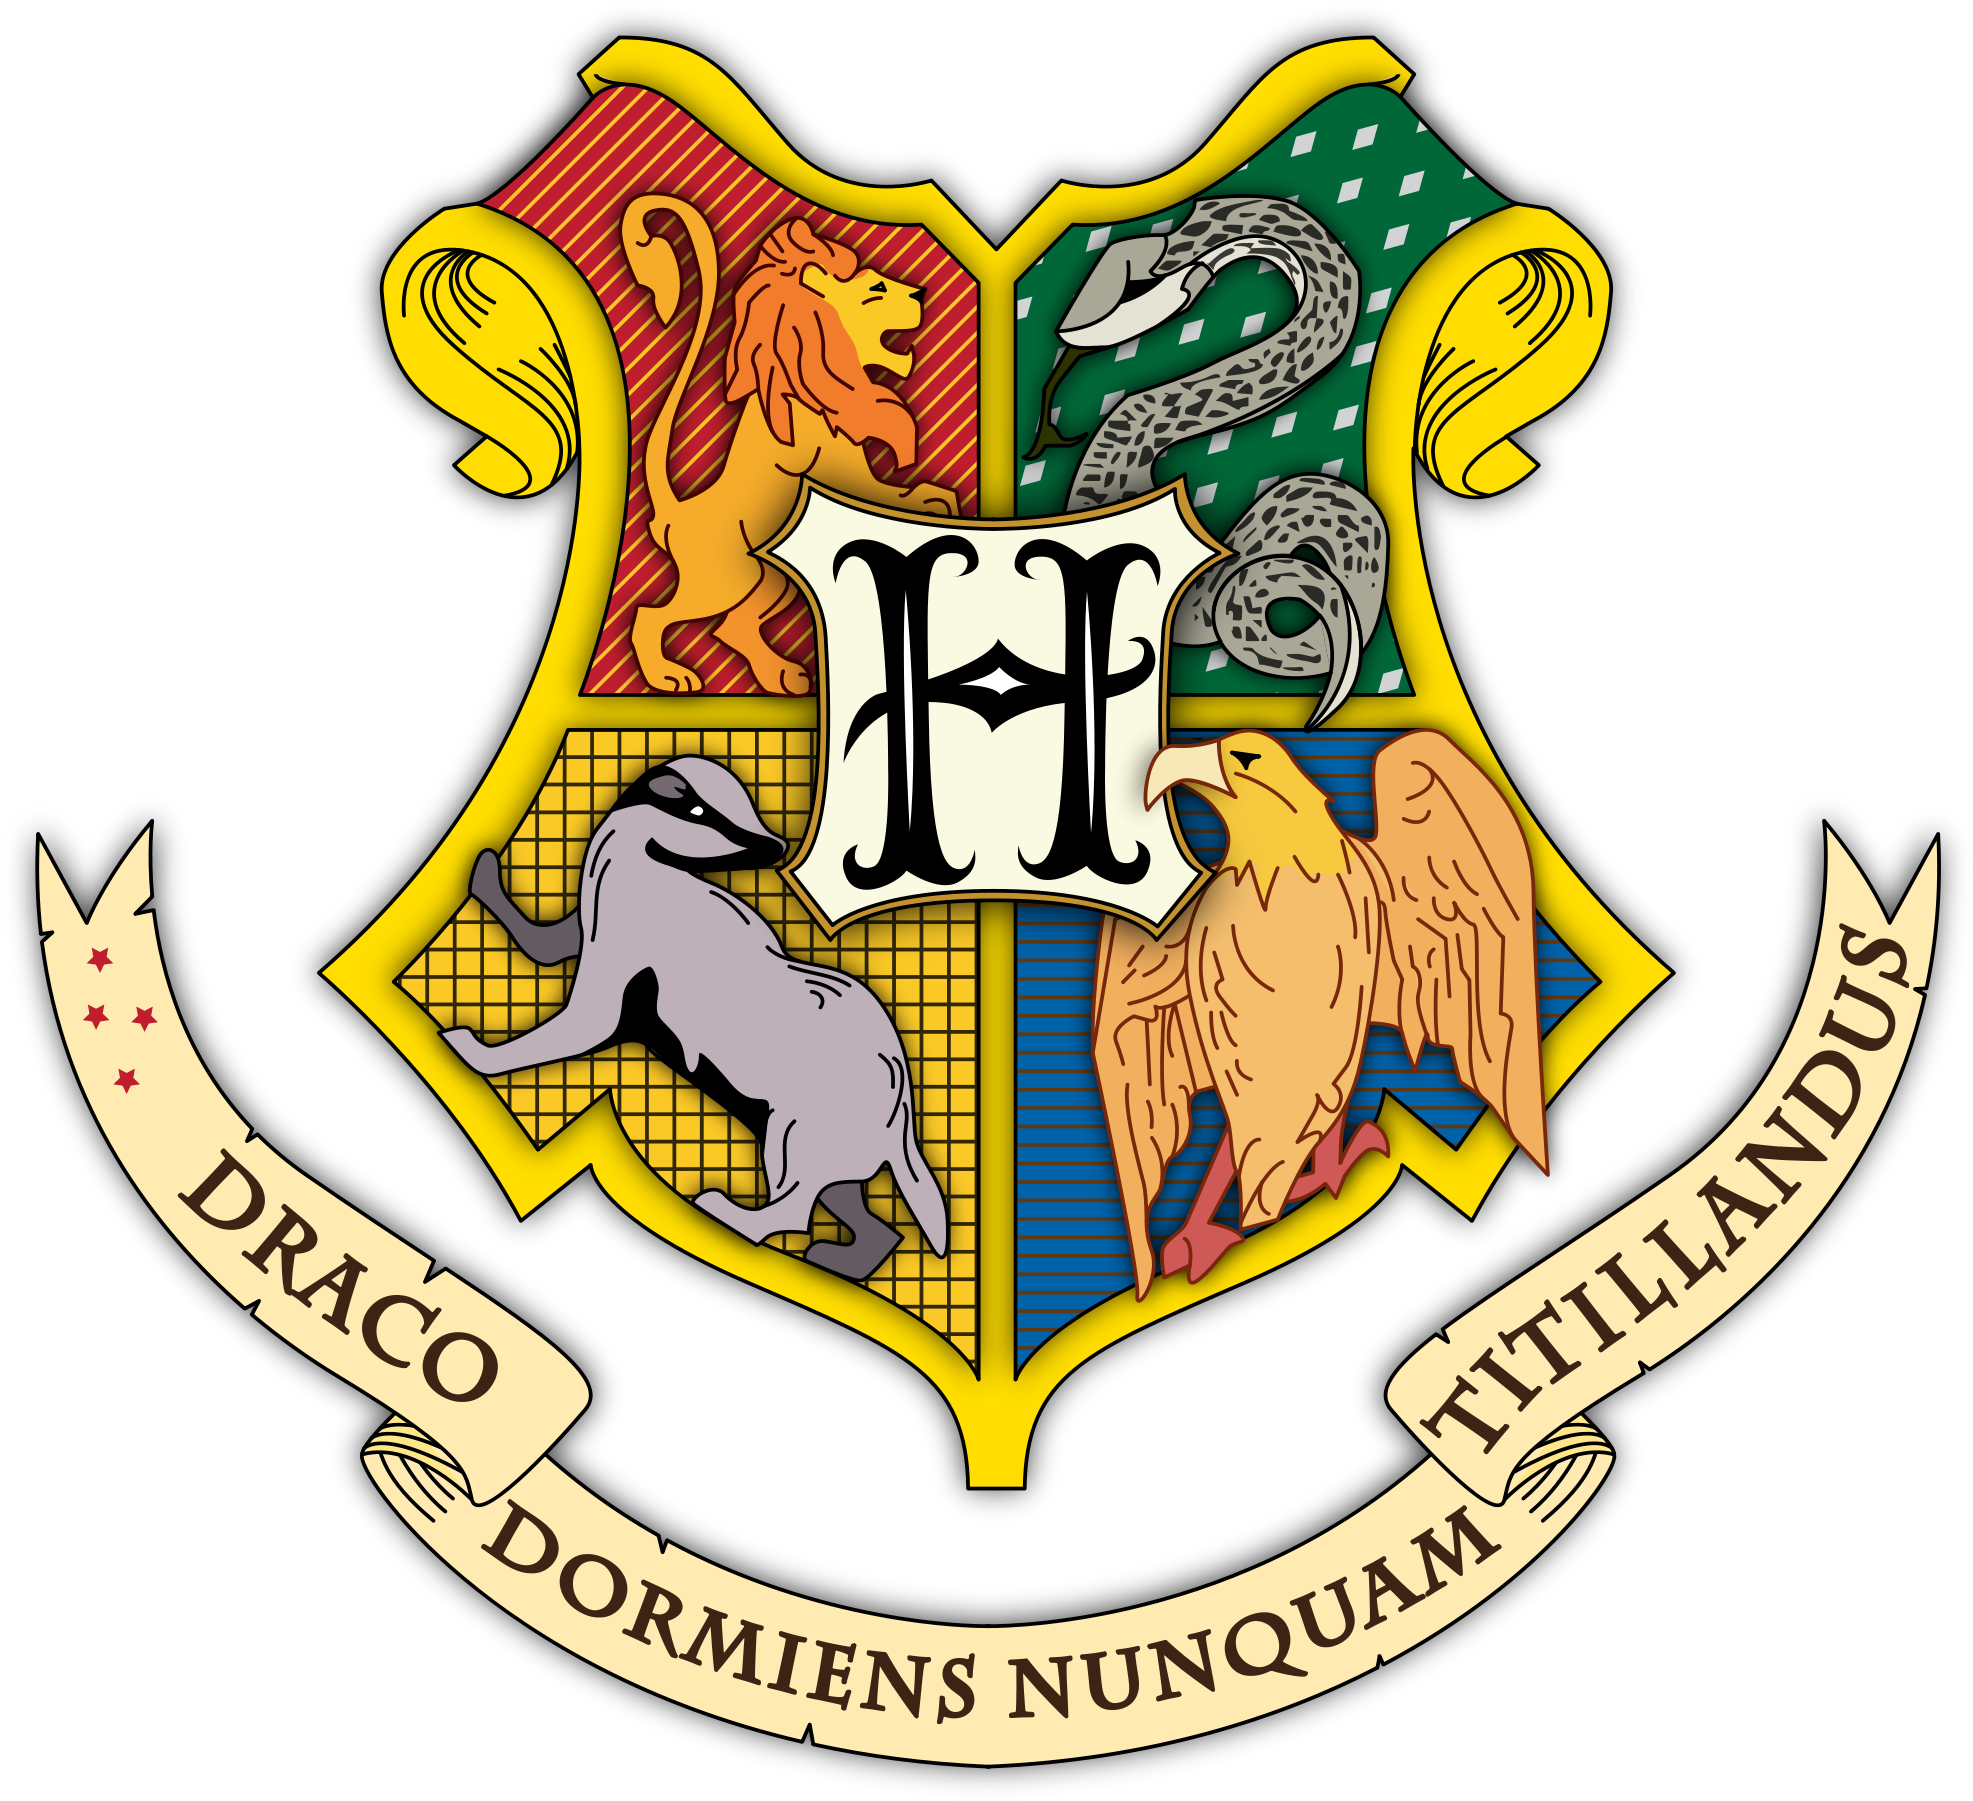 A Letter To Dumbledore - Hogwarts School Of Witchcraft And Wizardry (2000x2013)